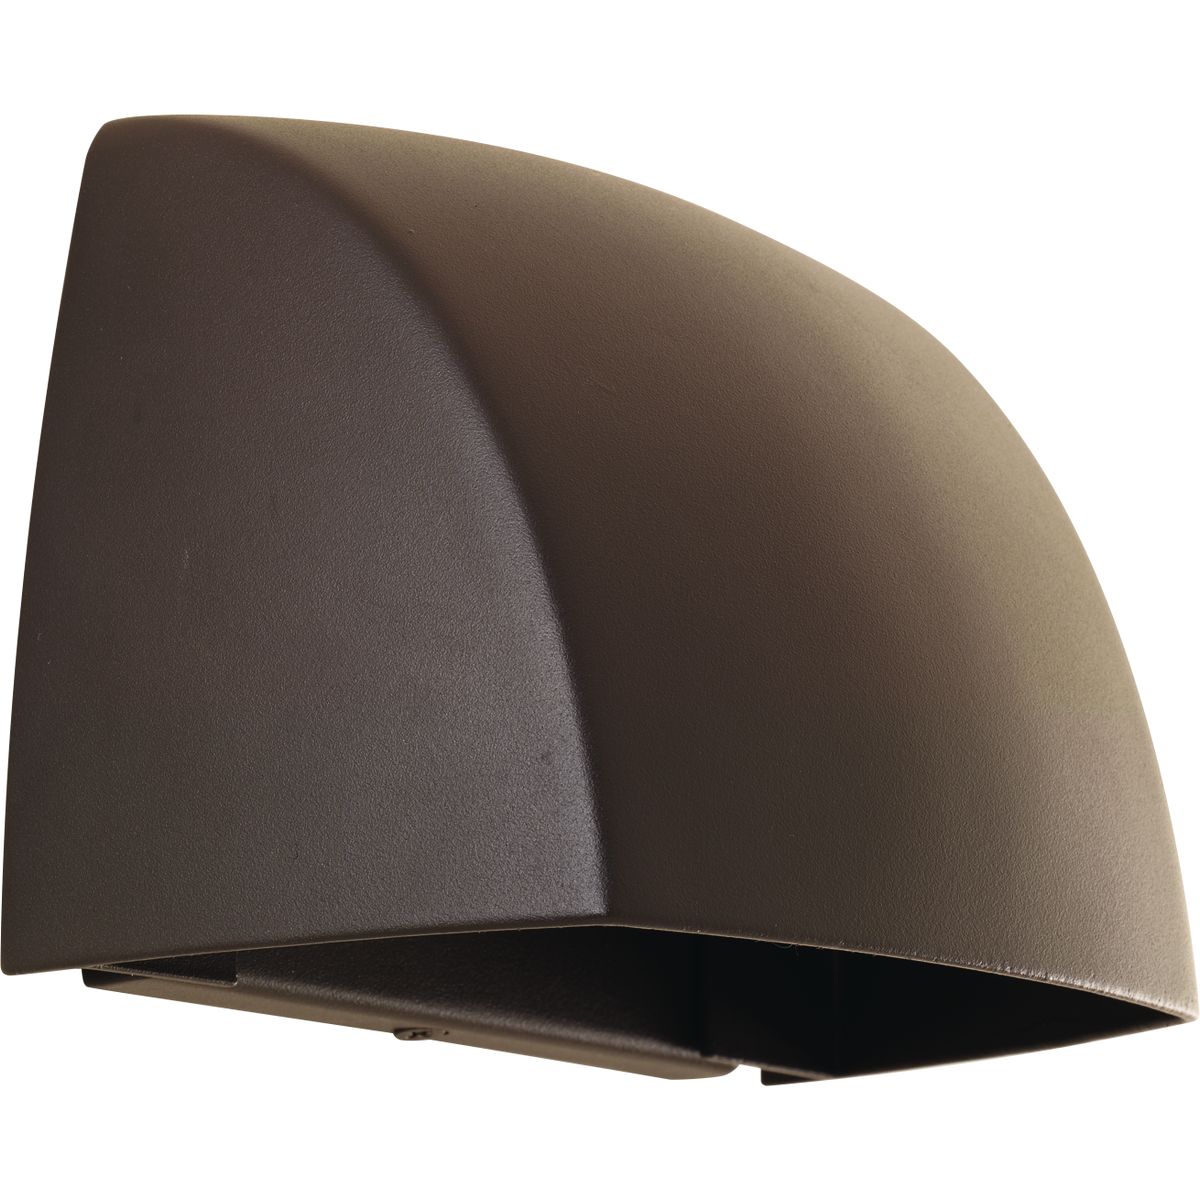 Modern geometric outdoor LED sconces are designed to complement a range of residential and commercial architectural styles. ADA compliant. 9w LED is 3000K, 90+ CRI in an Antique Bronze cast aluminum shade. Dark Sky compliant.